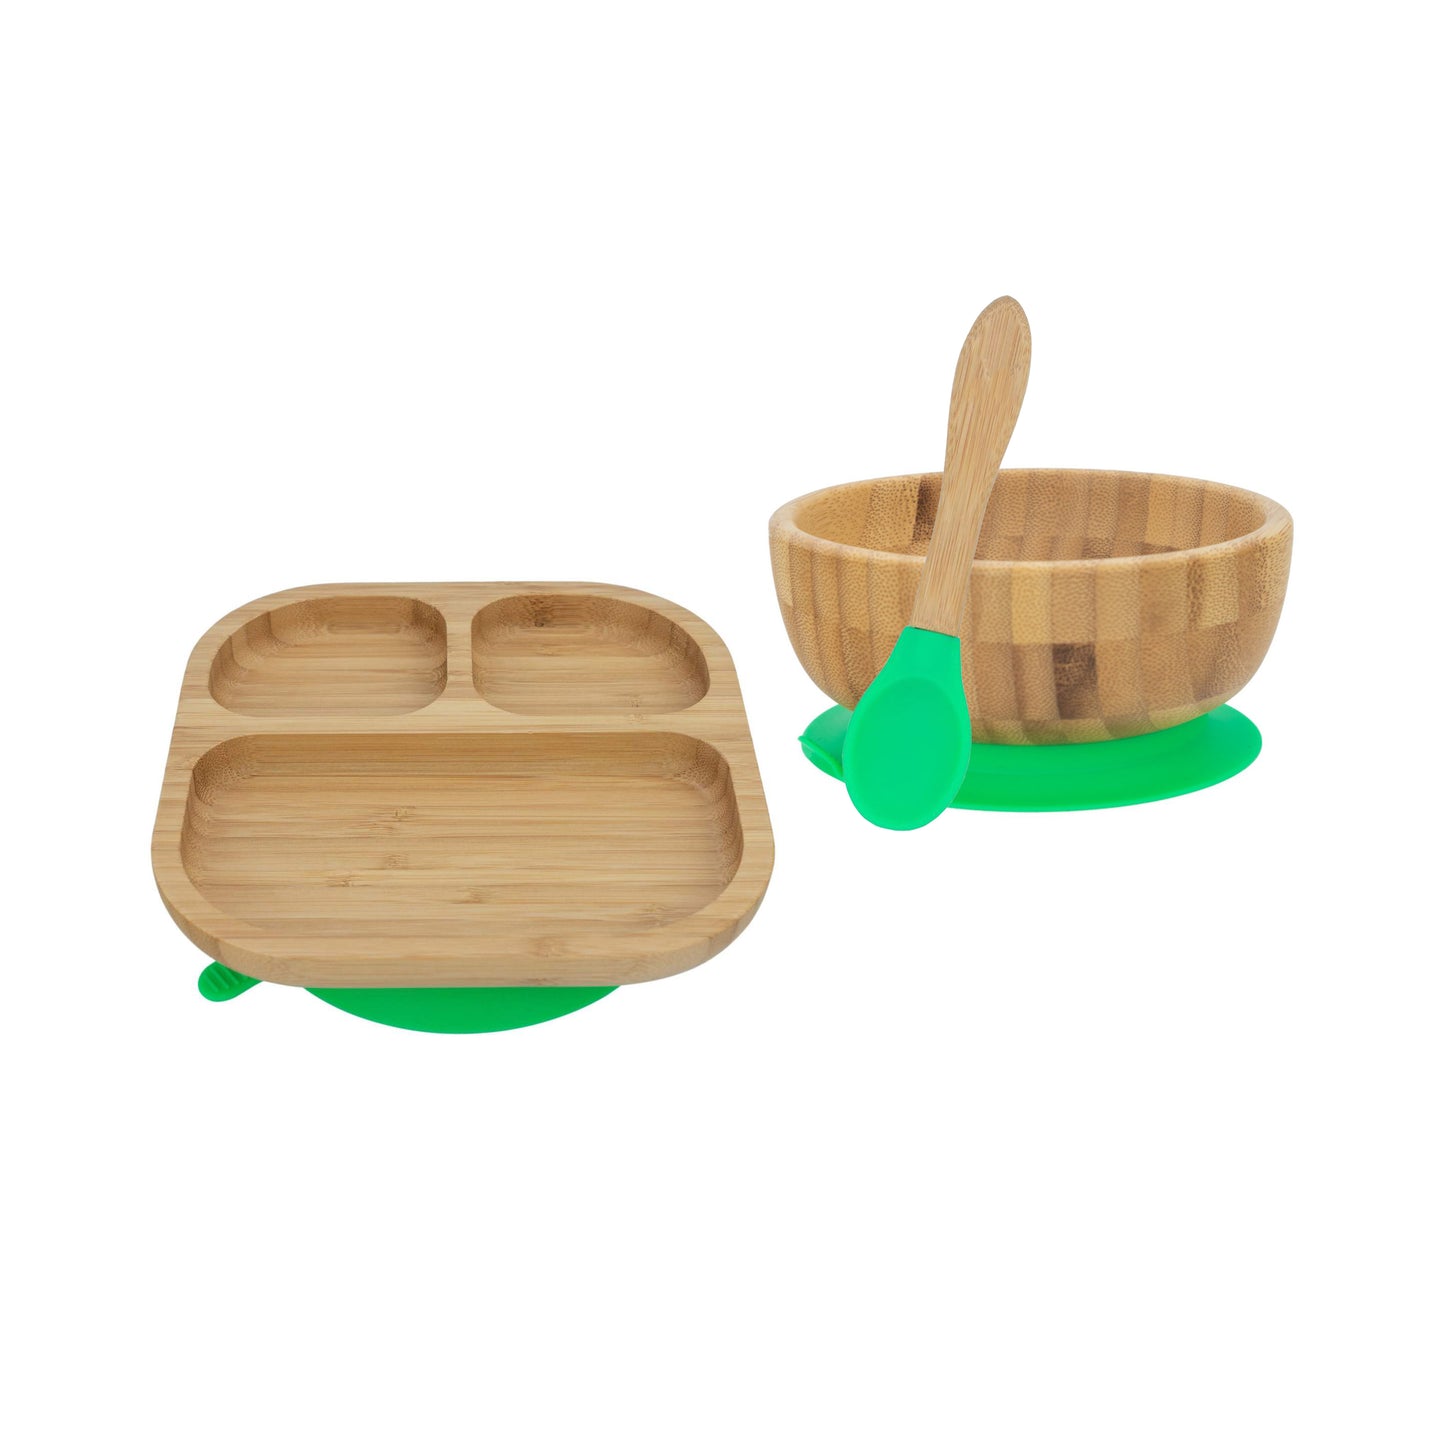 Personalised Wooden Tiny Dining Bamboo Plate, Bowl, and Spoon Set- Green | Babba box.